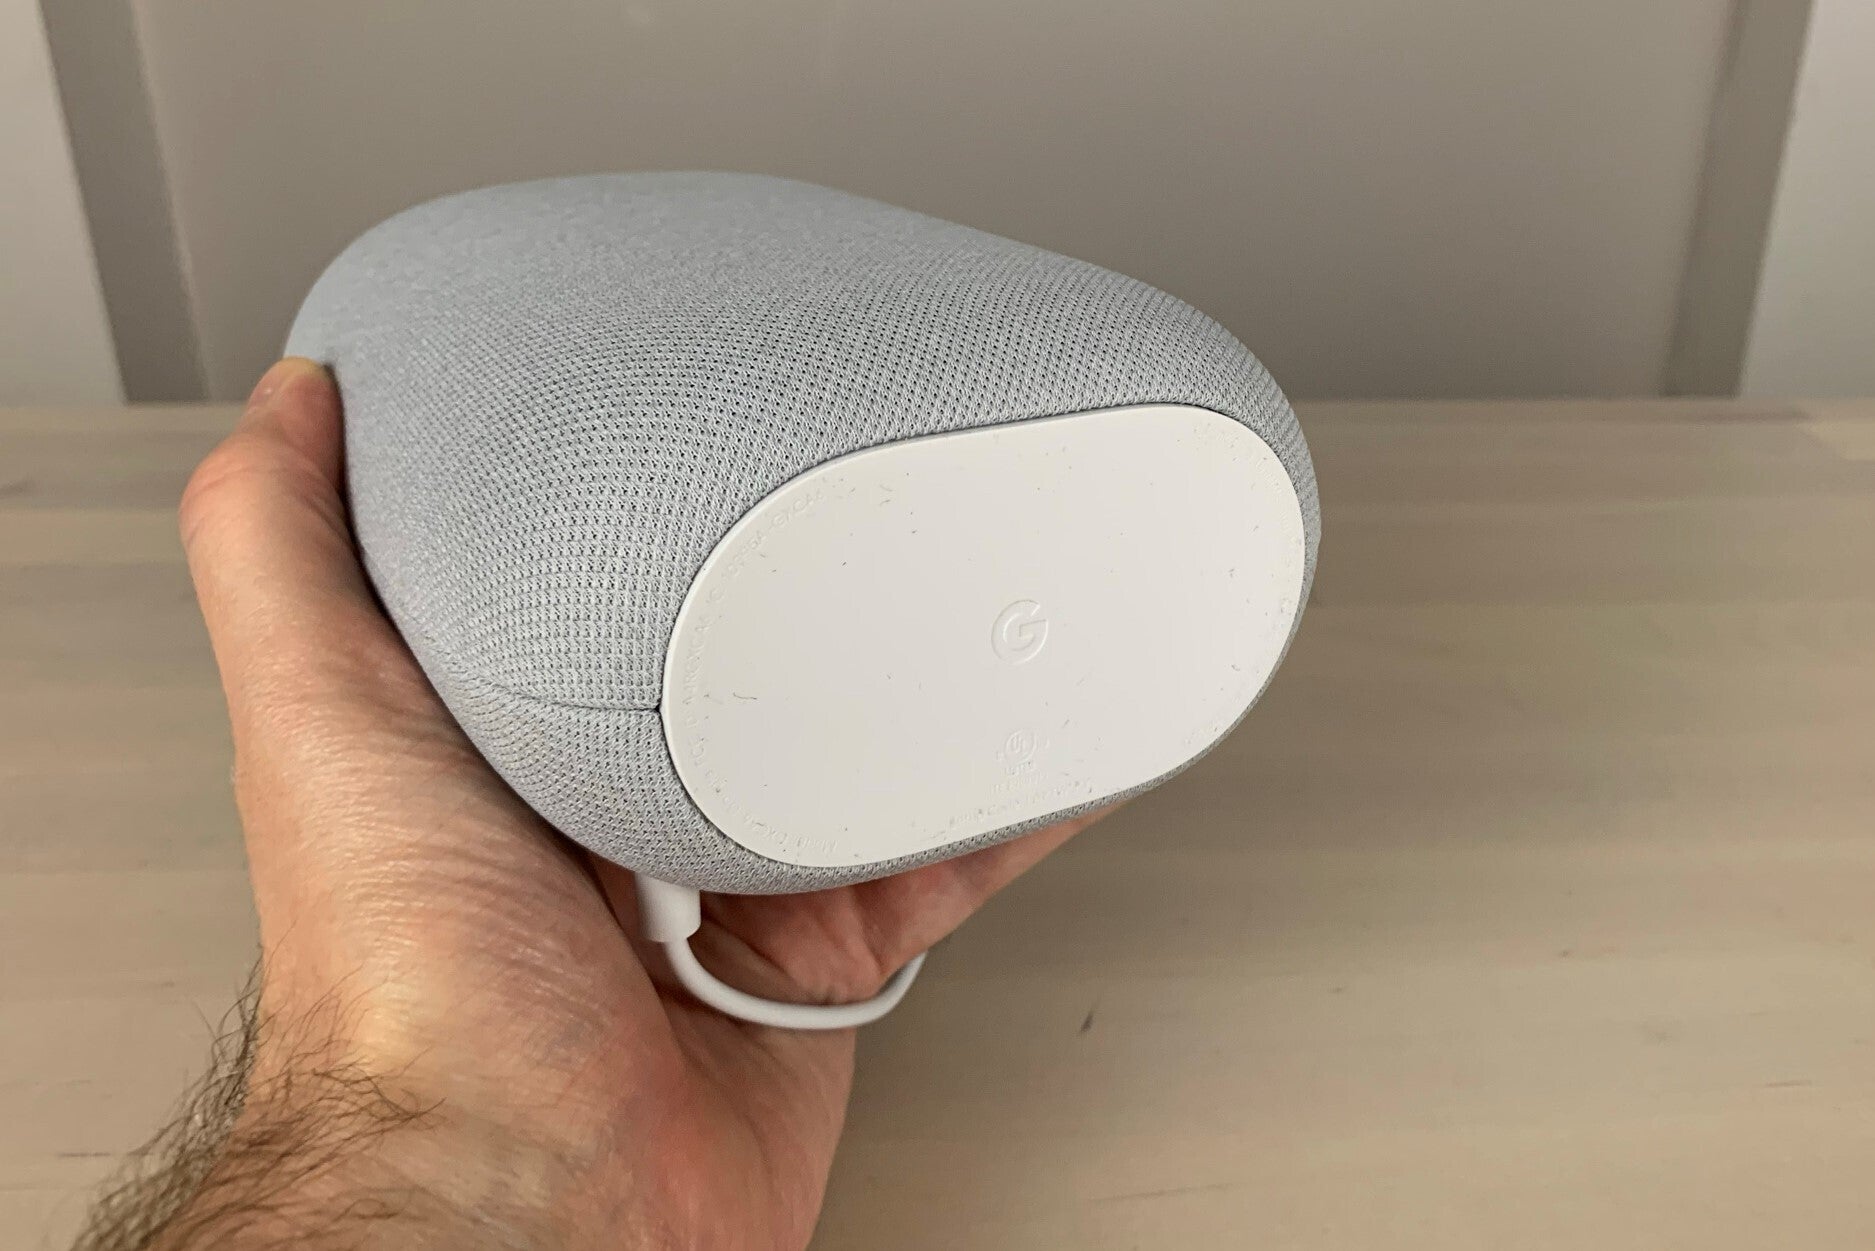 What has replaced Google Home?